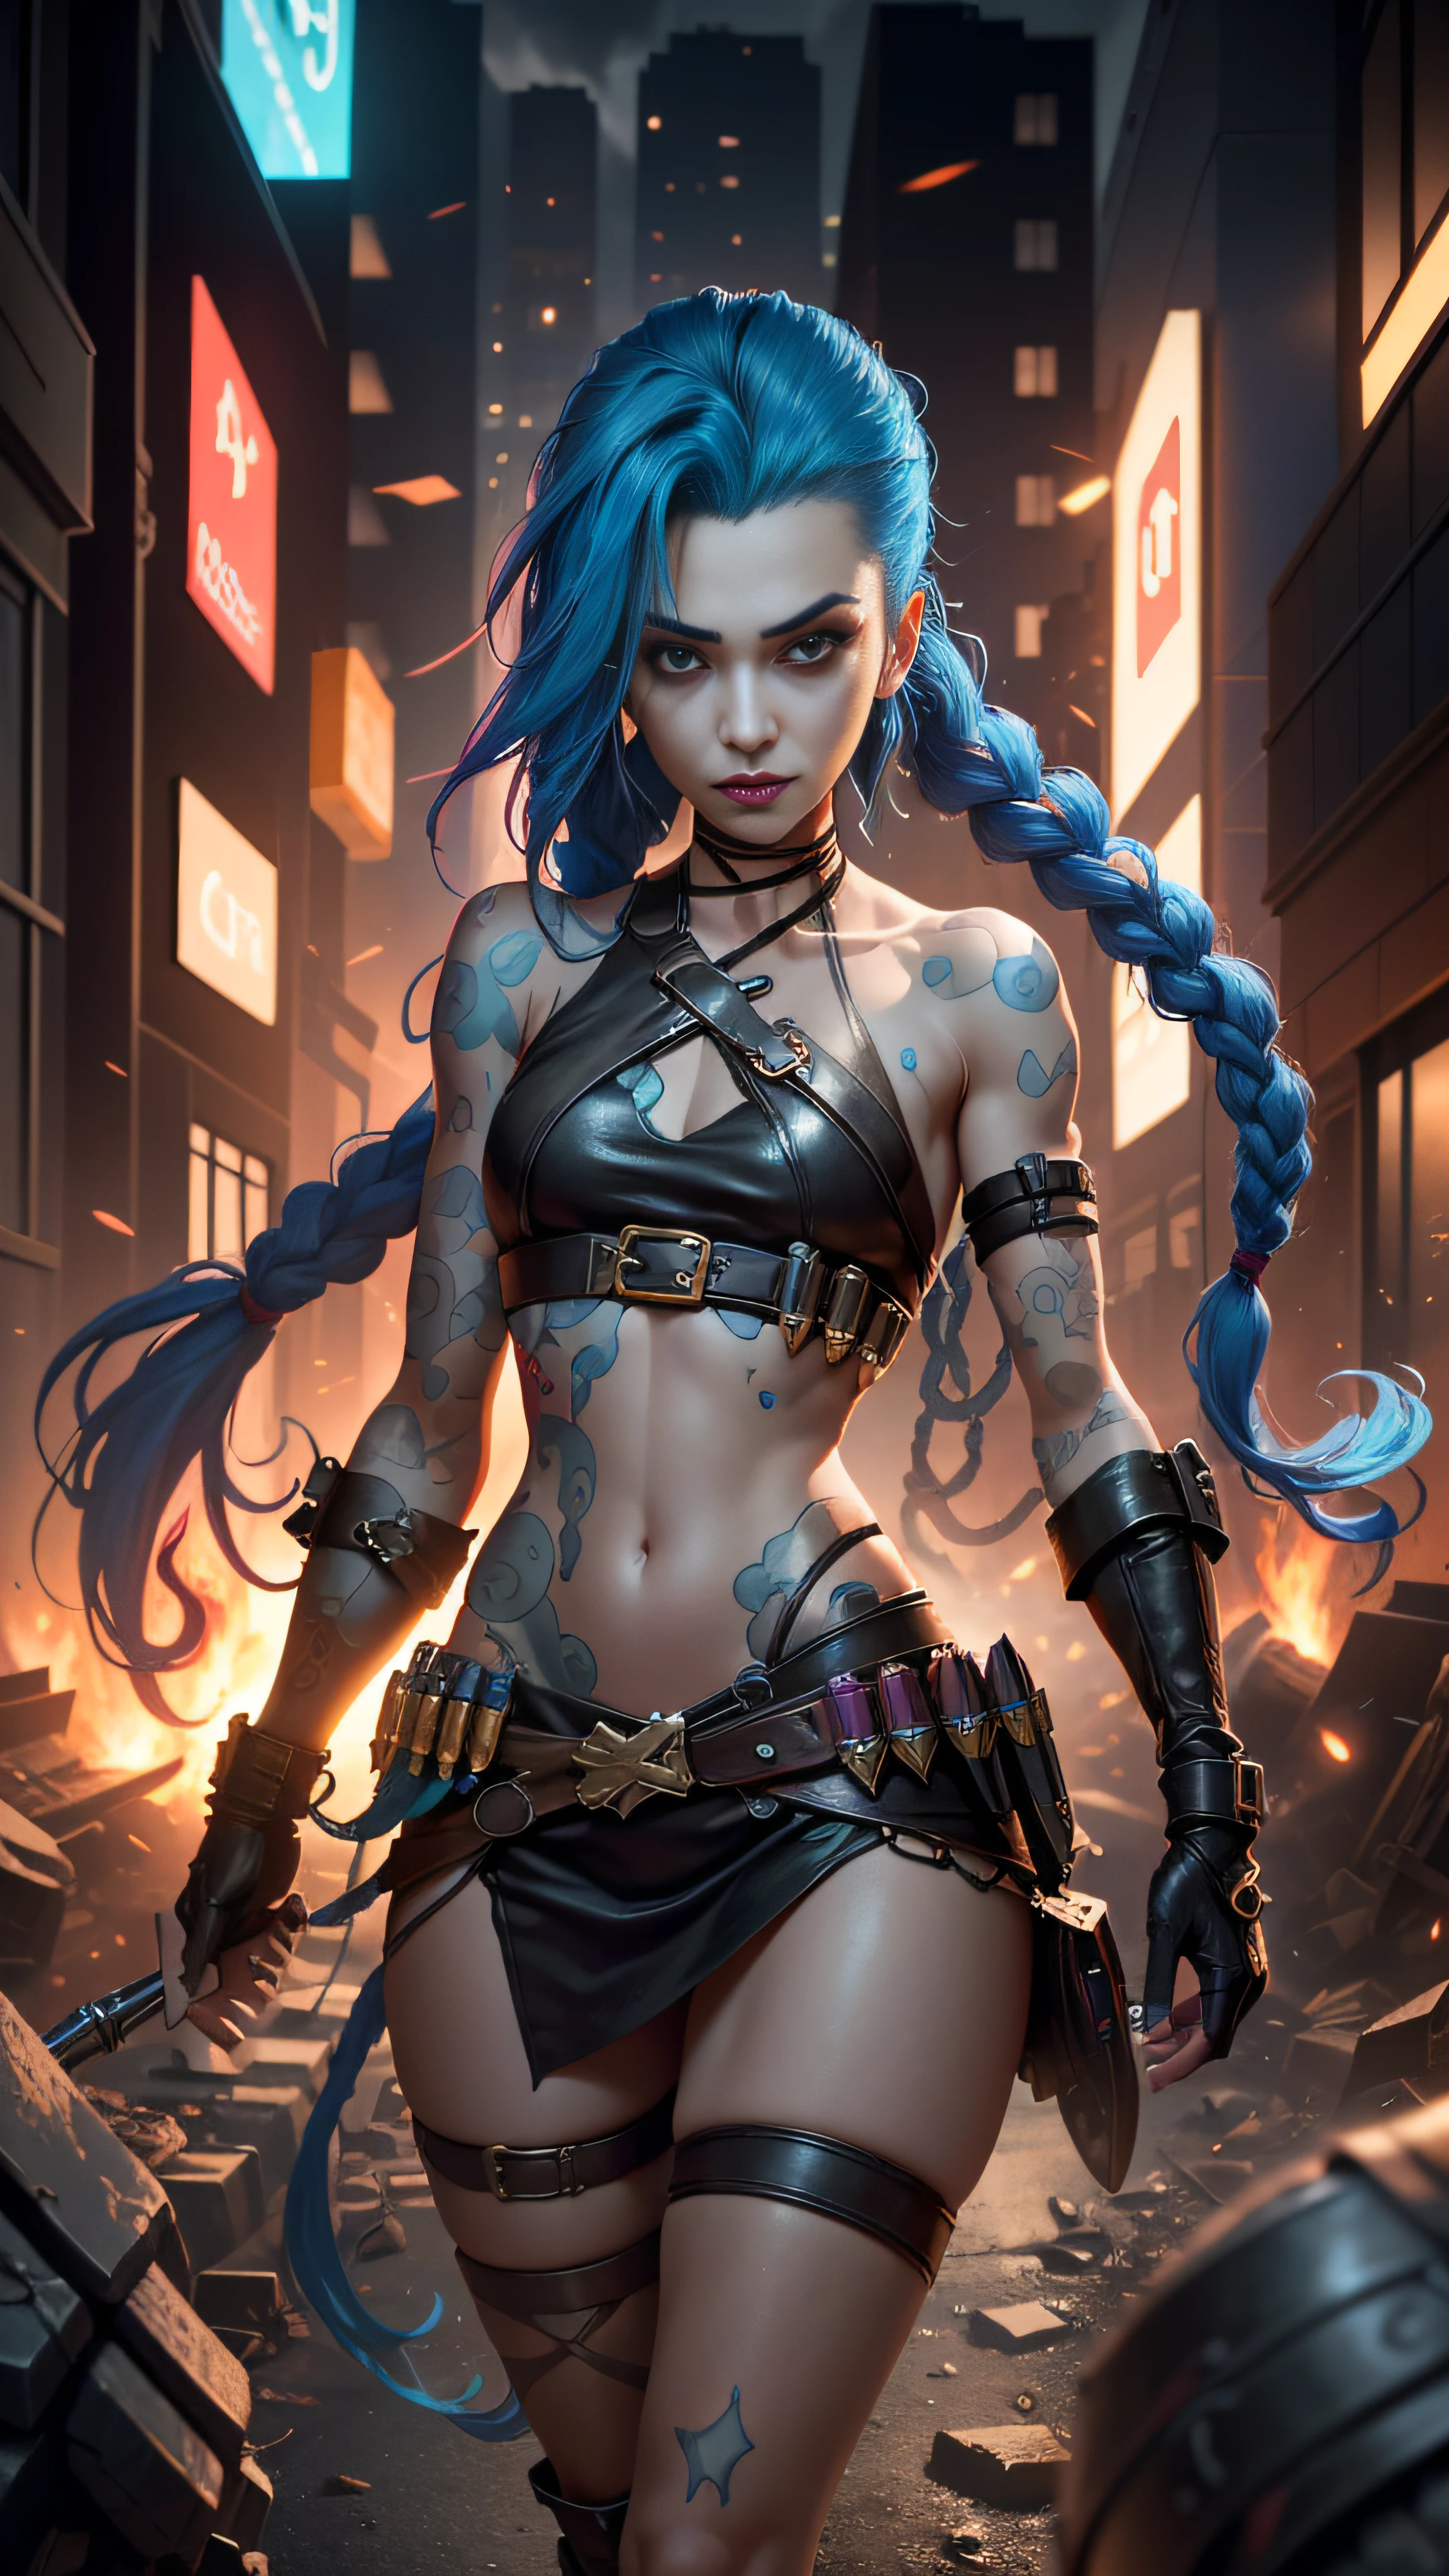 ((Best quality)), ((masterpiece)), (highly detailed:1.3), 3D, arcane style,In the dark and courageous dystopian city of Piltover, plagued by violence and divided into two opposing factions, a young prodigy named Jinx emerges. Having endured unimaginable loss and abandonment, she embraced a life of chaos and destruction. Known for her inventive and explosive abilities, Jinx becomes an icon of rebellion against the oppressive forces that control the city. However, haunted by guilt and battling inner demons, she must confront her past and decide whether to continue on the path of anarchy or seek redemption amid the turmoil. Explore Jinx's journey as she navigates a treacherous world, fighting for survival, unlocking secrets, and discovering the true meaning of her twisted existence, chaos reigns supreme, and at the center of it all is Jinx, the embodiment of unpredictability. Delve deep into Jinx's twisted mind, exploring the origins of his madness and the driving force behind his destructive nature. Unravel the moments that shaped her into the crazed, iconic character we know. Take us on a wild journey through the vibrant streets of Piltover and the shadowy suburb of Zaun as Jinx wreaks havoc with his explosive arsenal. Can redemption find its way into Jinx's fractured soul? Or will she dance forever on the edge of sanity, embracing the chaos that fuels her very existence? Arcane's fate hangs in the balance as Jinx's path intertwines with unlikely allies and formidable enemies. Ignite your imagination and paint a vivid portrait of Jinx's distorted psyche, capturing the essence of her madness and the indomitable spirit that defines it, HDR (High Dynamic Range), Ray Tracing, NVIDIA RTX, Super-Resolution, Unreal 5, Subsurface Scattering, PBR Texturing, Post-processing, Anisotropic Filtering, Depth of Field, Maximum Clarity and Sharpness, Multit Textures